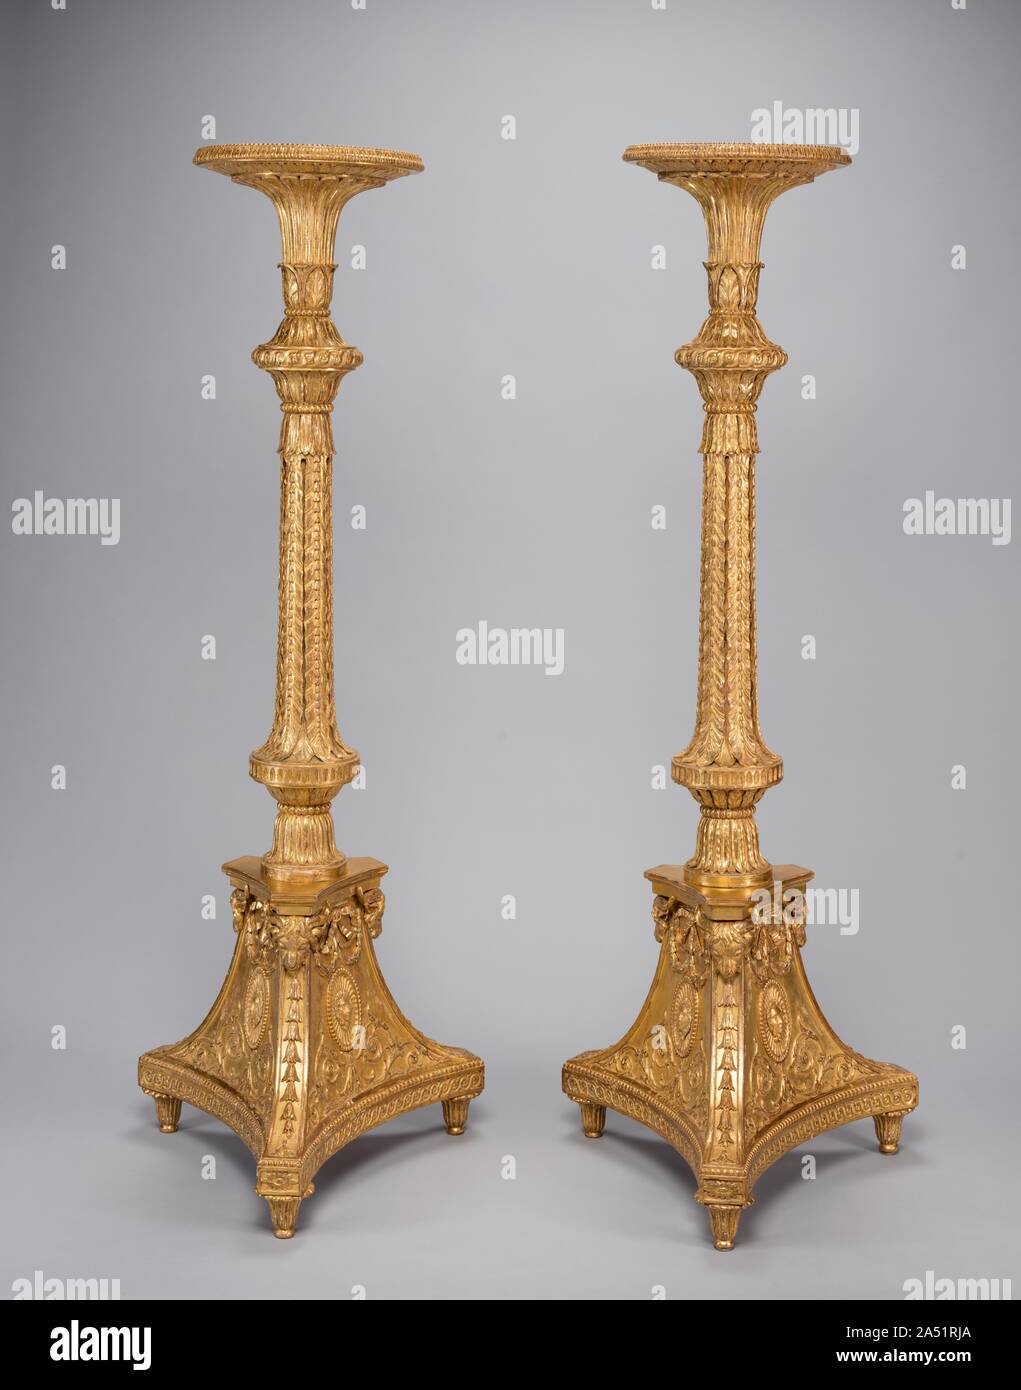 Pair of Candle Stands (torch&#xe8;res), c. 1773. Inspired by discoveries of ancient ruins at Herculaneum and Pompeii in the 1730s, fashionable aristocratic architecture and interiors reflected a taste for neoclassical decoration. Thomas Chippendale, the most recognizable, influential London cabinetmaker of this era made these candle stands as part of a larger suite of four for the grand drawing room of Brocket Hall, the country seat of Sir Peniston Lamb, a recently knighted English lord. Their design is modeled on an ancient Roman marble candlestick decorated with carved acanthus leaves, swags Stock Photo